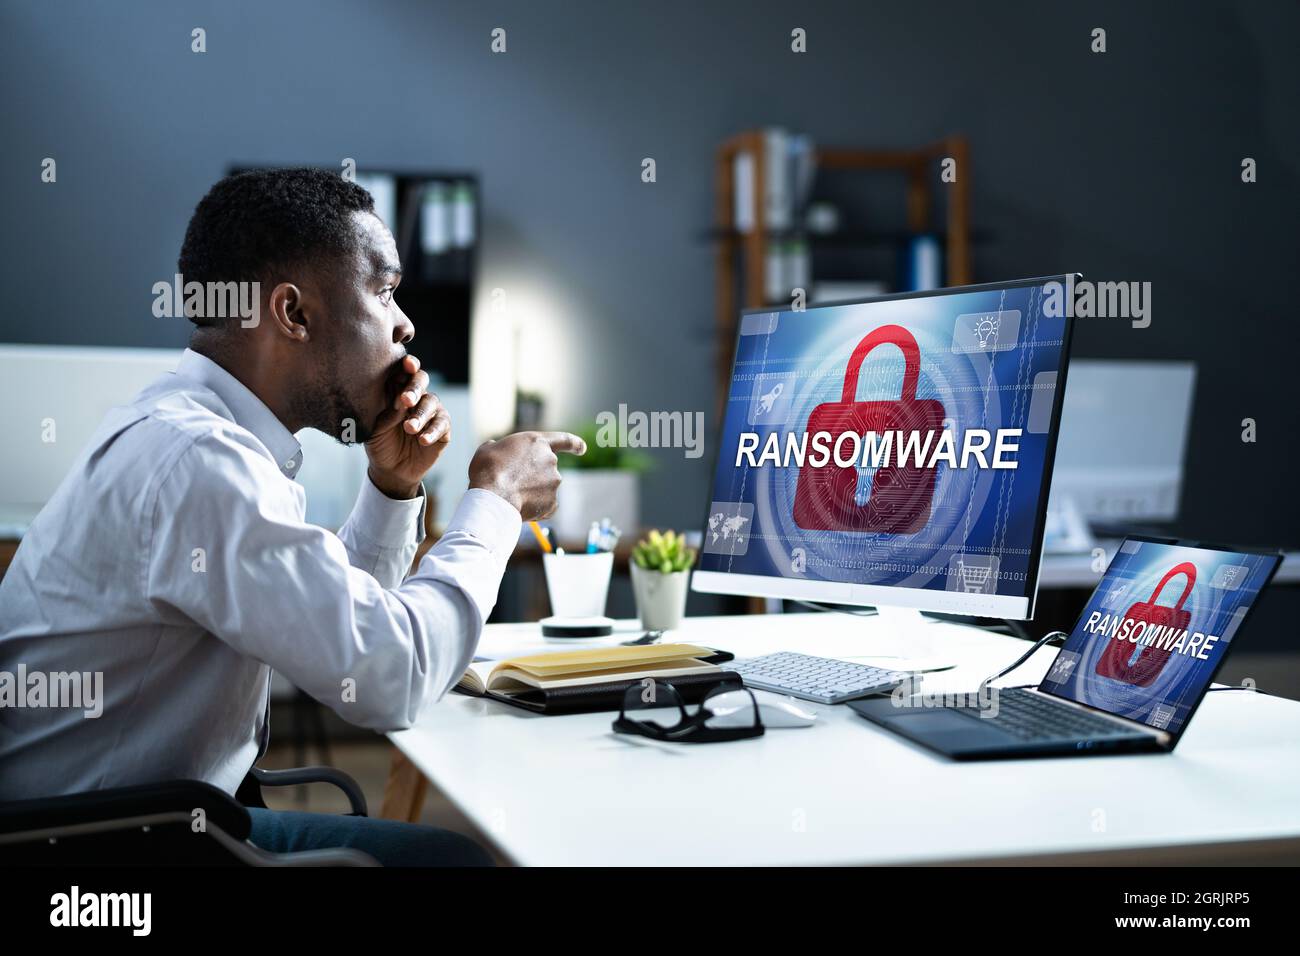 Ransomware Malware Cyber-Angriff Auf Business-Computer Stockfoto